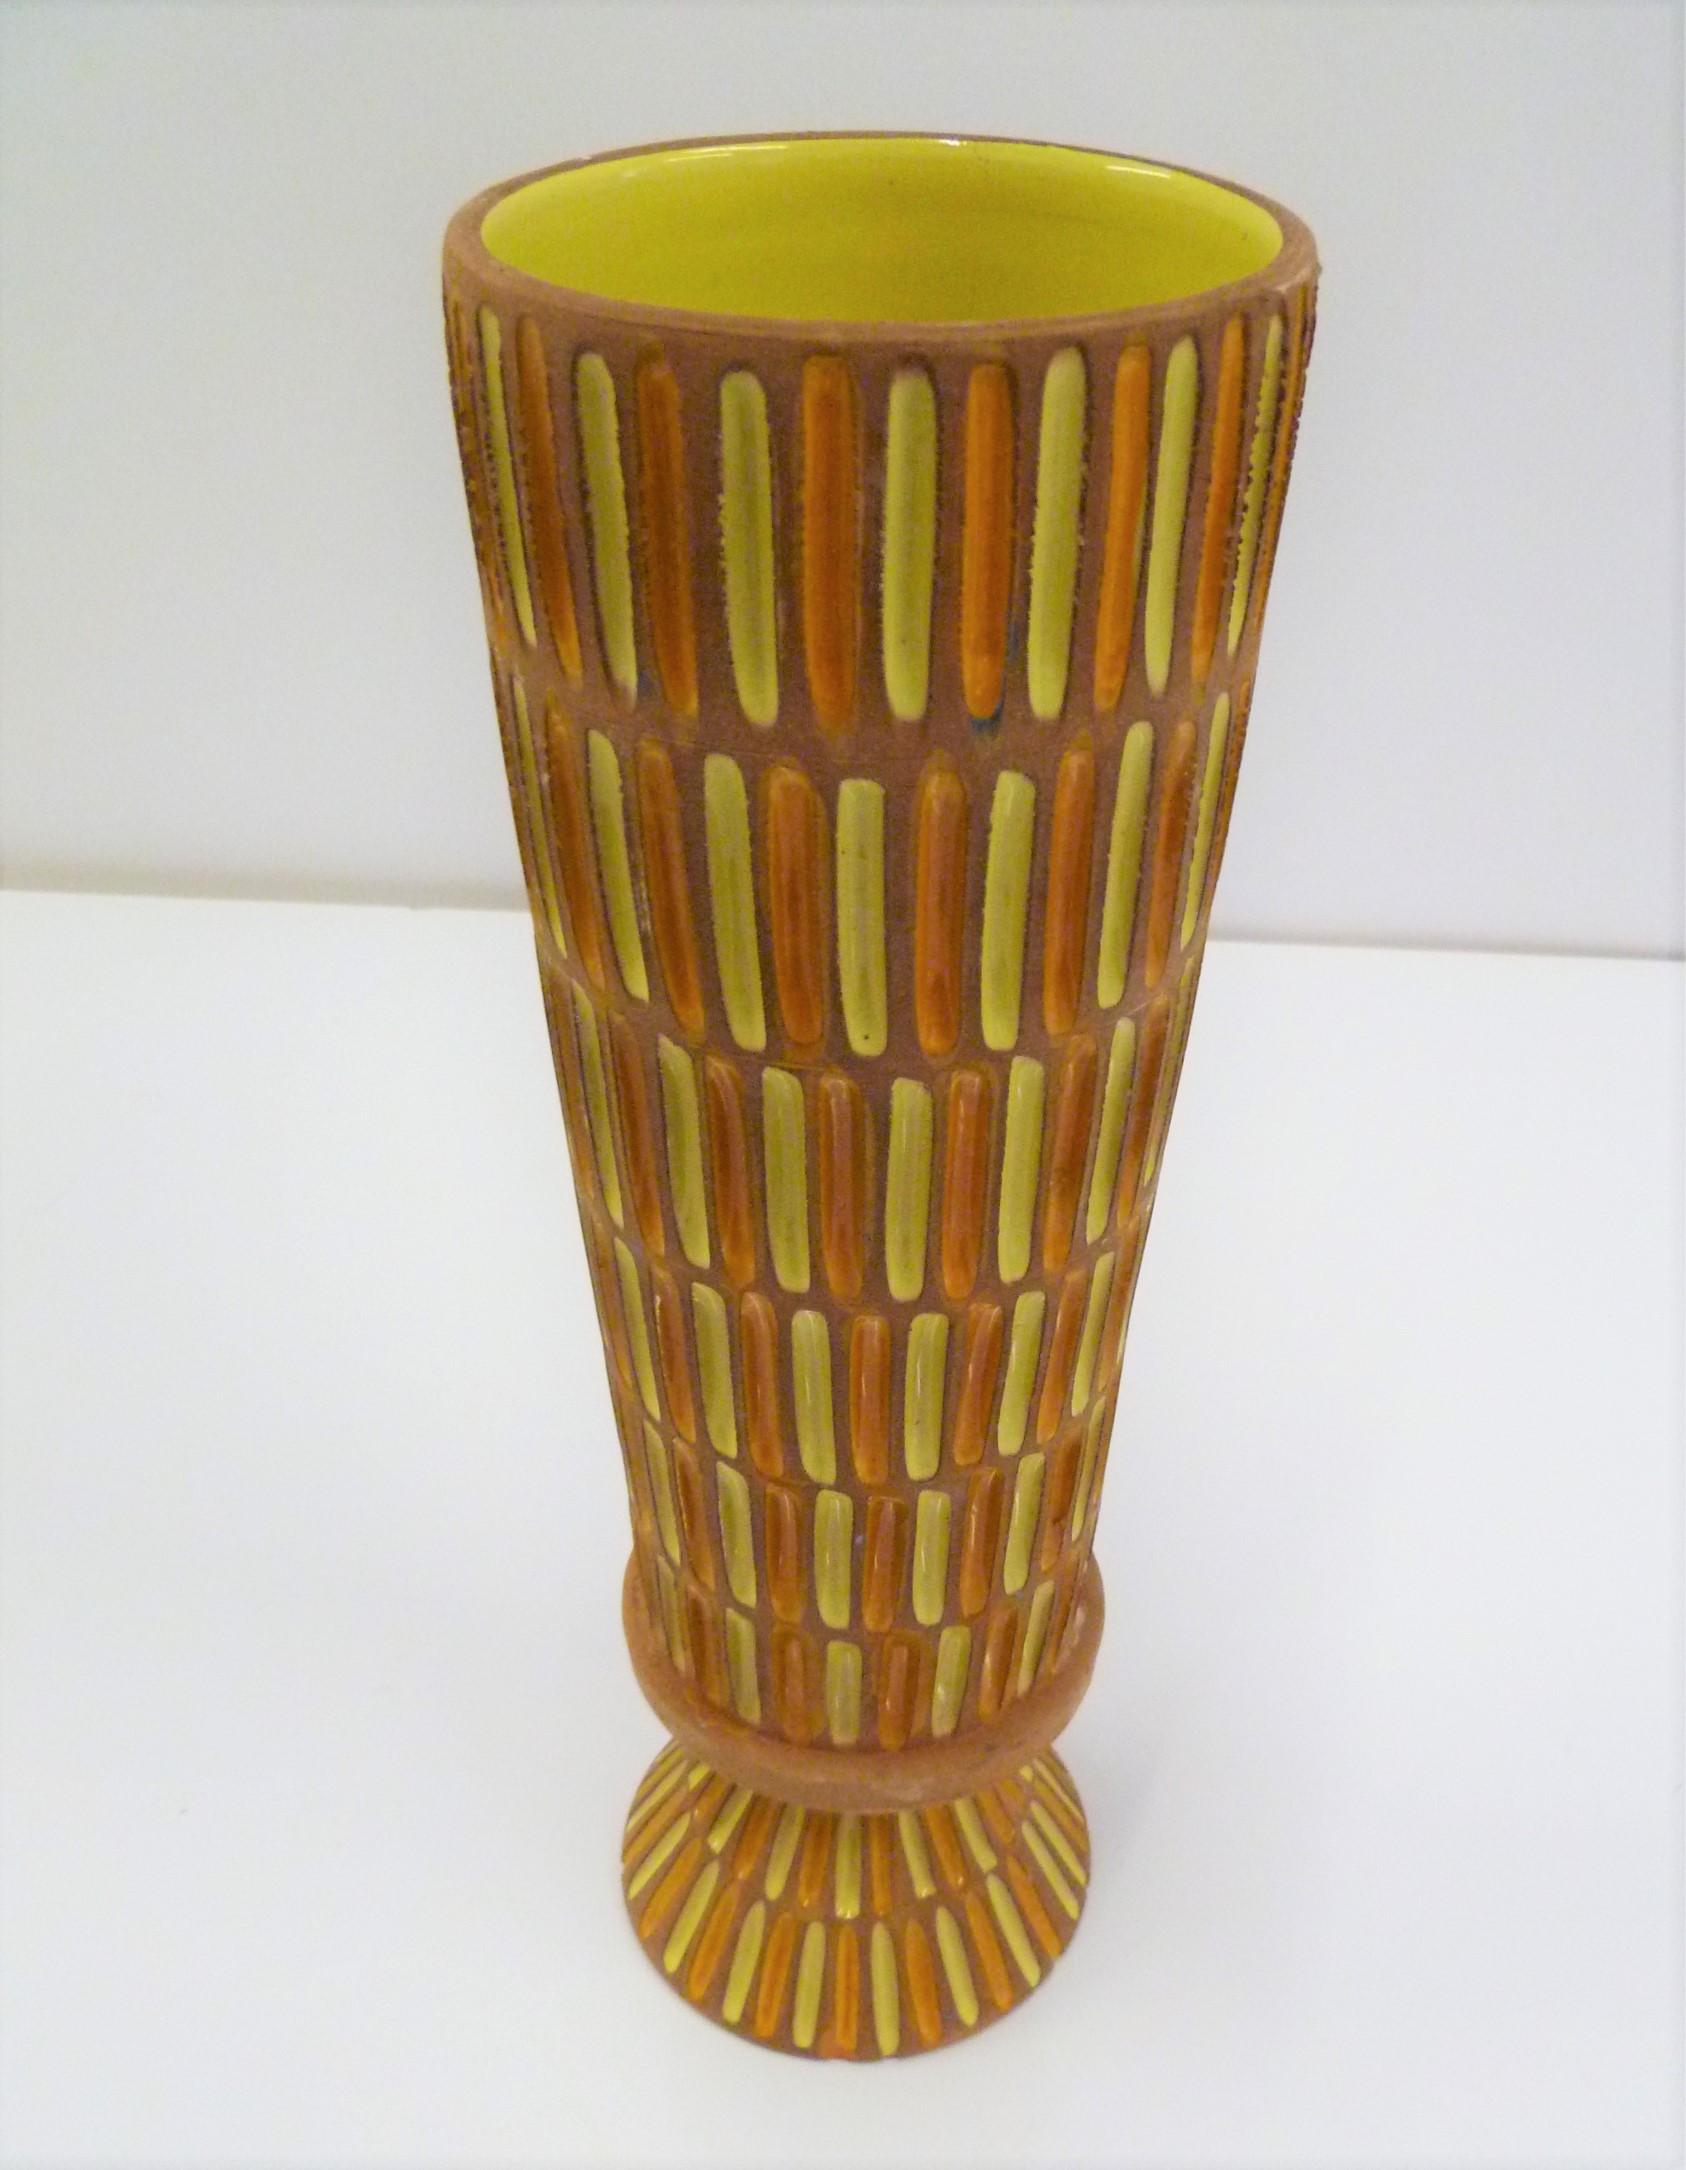 A tall Italian Mid-Century Modern footed Pottery vase produced by Bitossi in the 1960s for retailer Raymor and designed by Aldo Londi. This vase features an unglazed clay body with glazed incisions colored in bright orange and lemon yellow and lemon